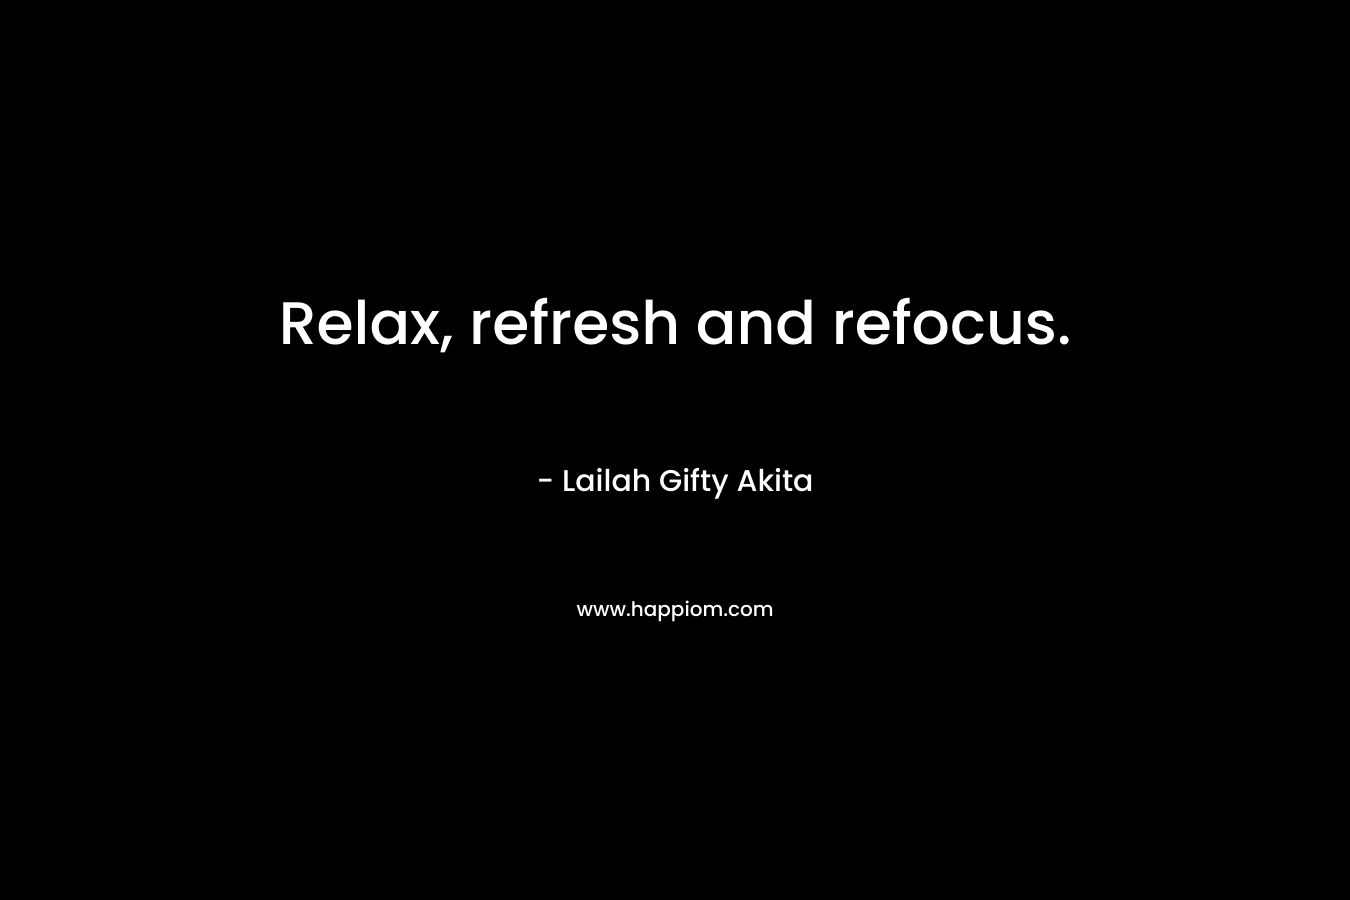 Relax, refresh and refocus.